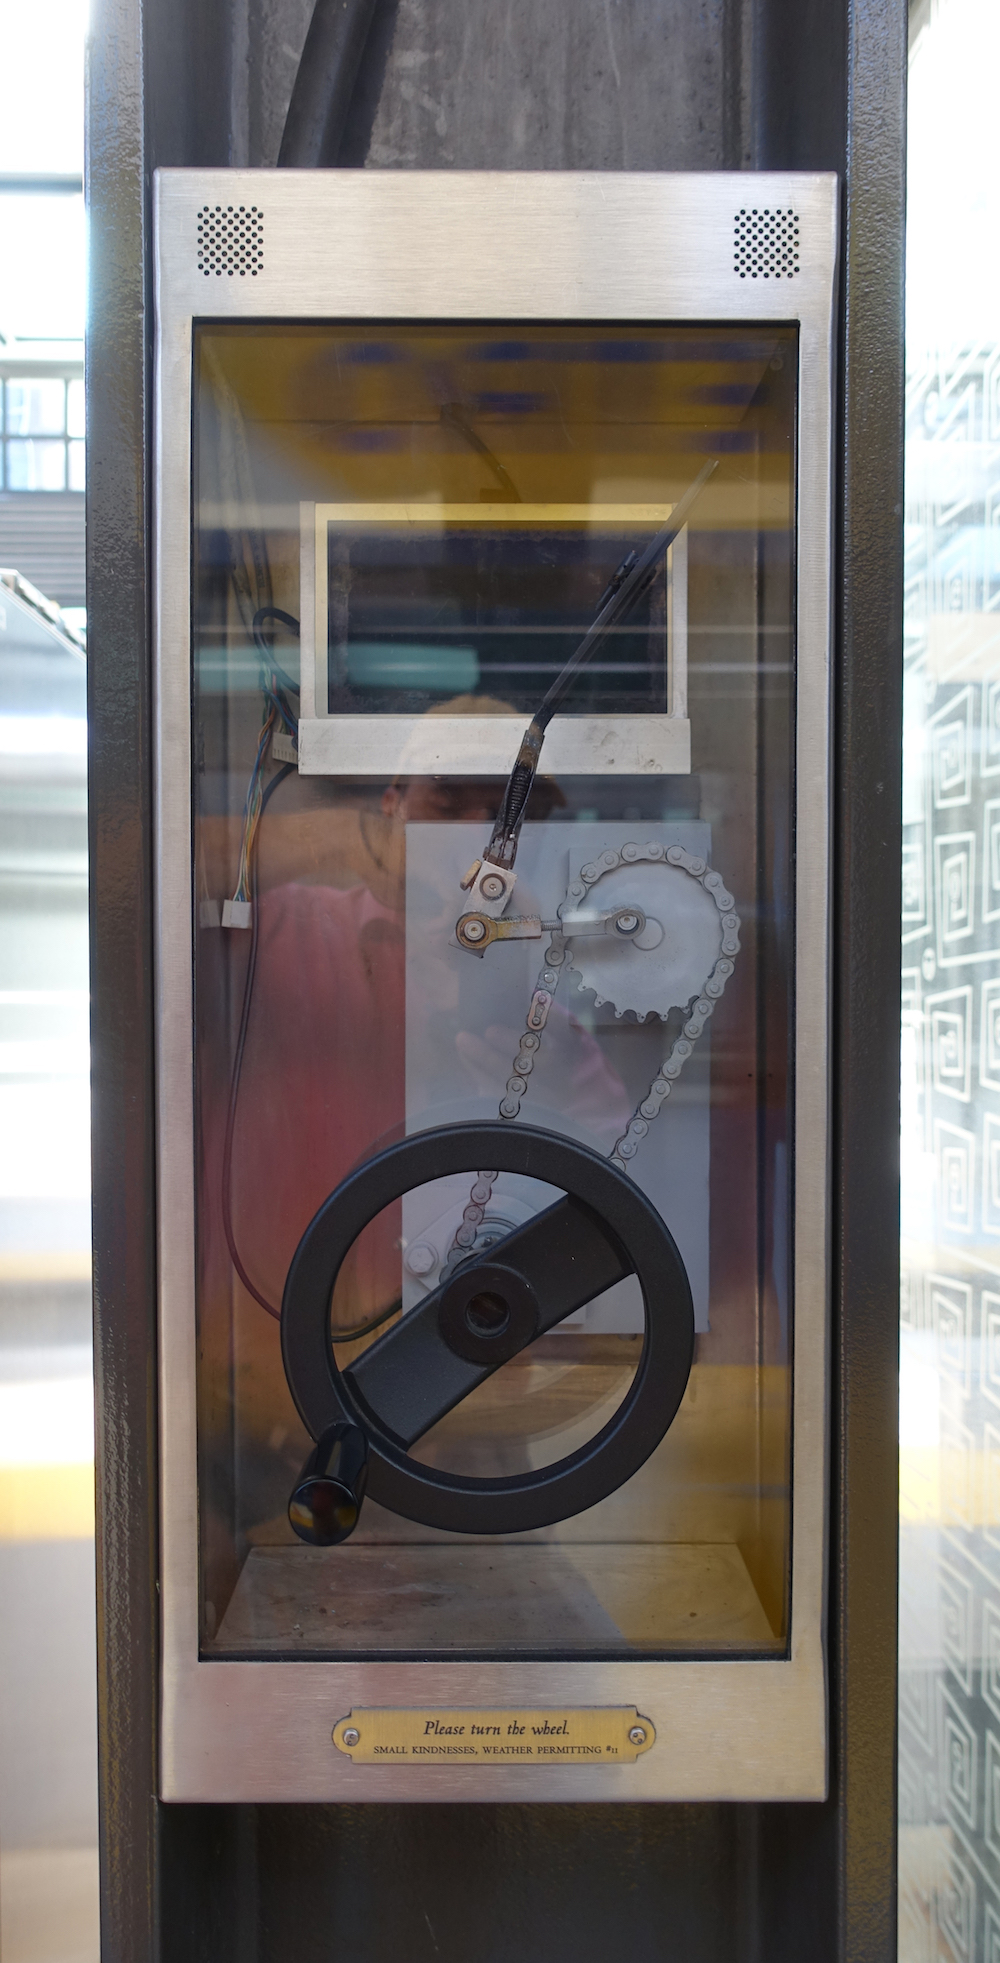 Title: Please turn the wheel Material: Stainless Steel box, glass, audio and video components, speaker, wheel mechanism, wiper, chain, cogs and title plate.